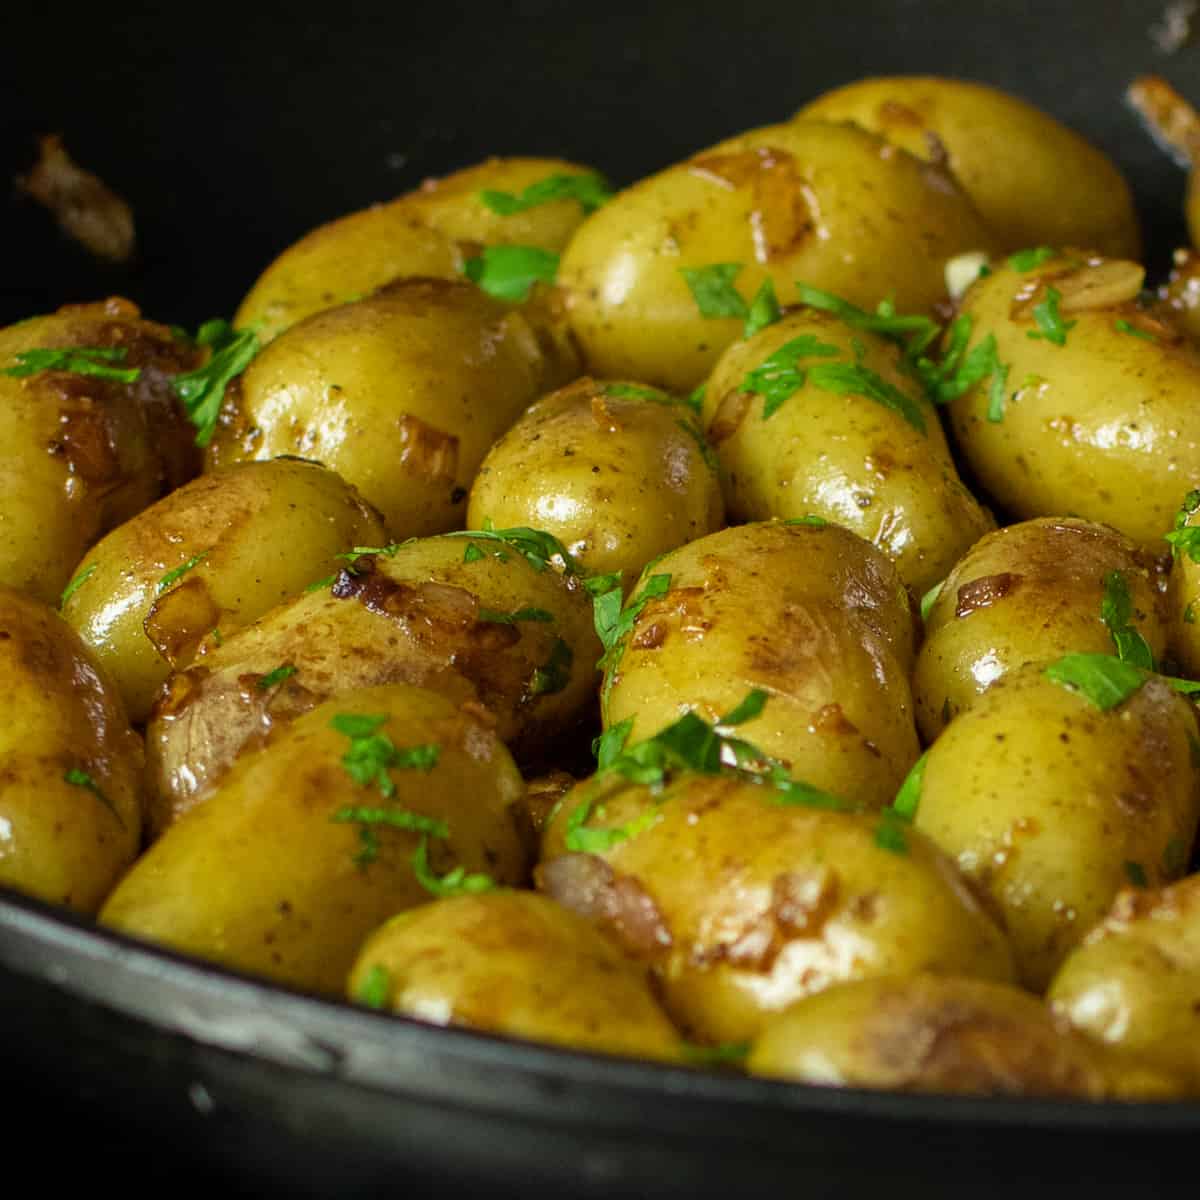 Cooked baby potatoes in a frying pan with fresh parsley sprinkled on top.